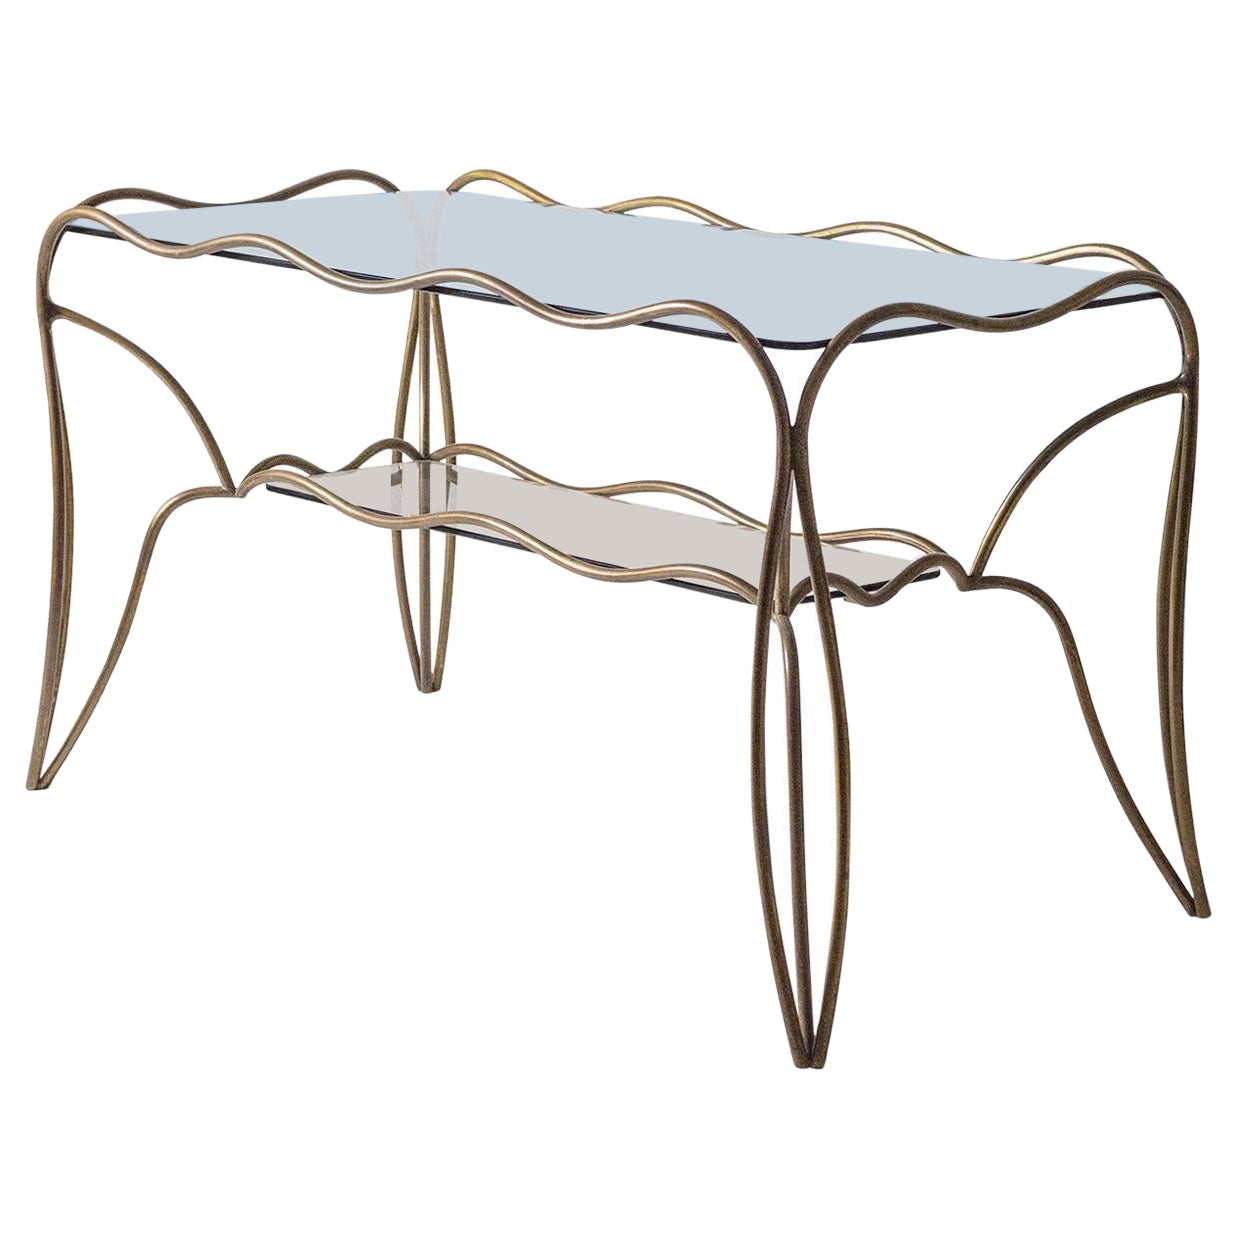 Unique Italian Brass and Colored Glass Cocktail Table, 1950s For Sale